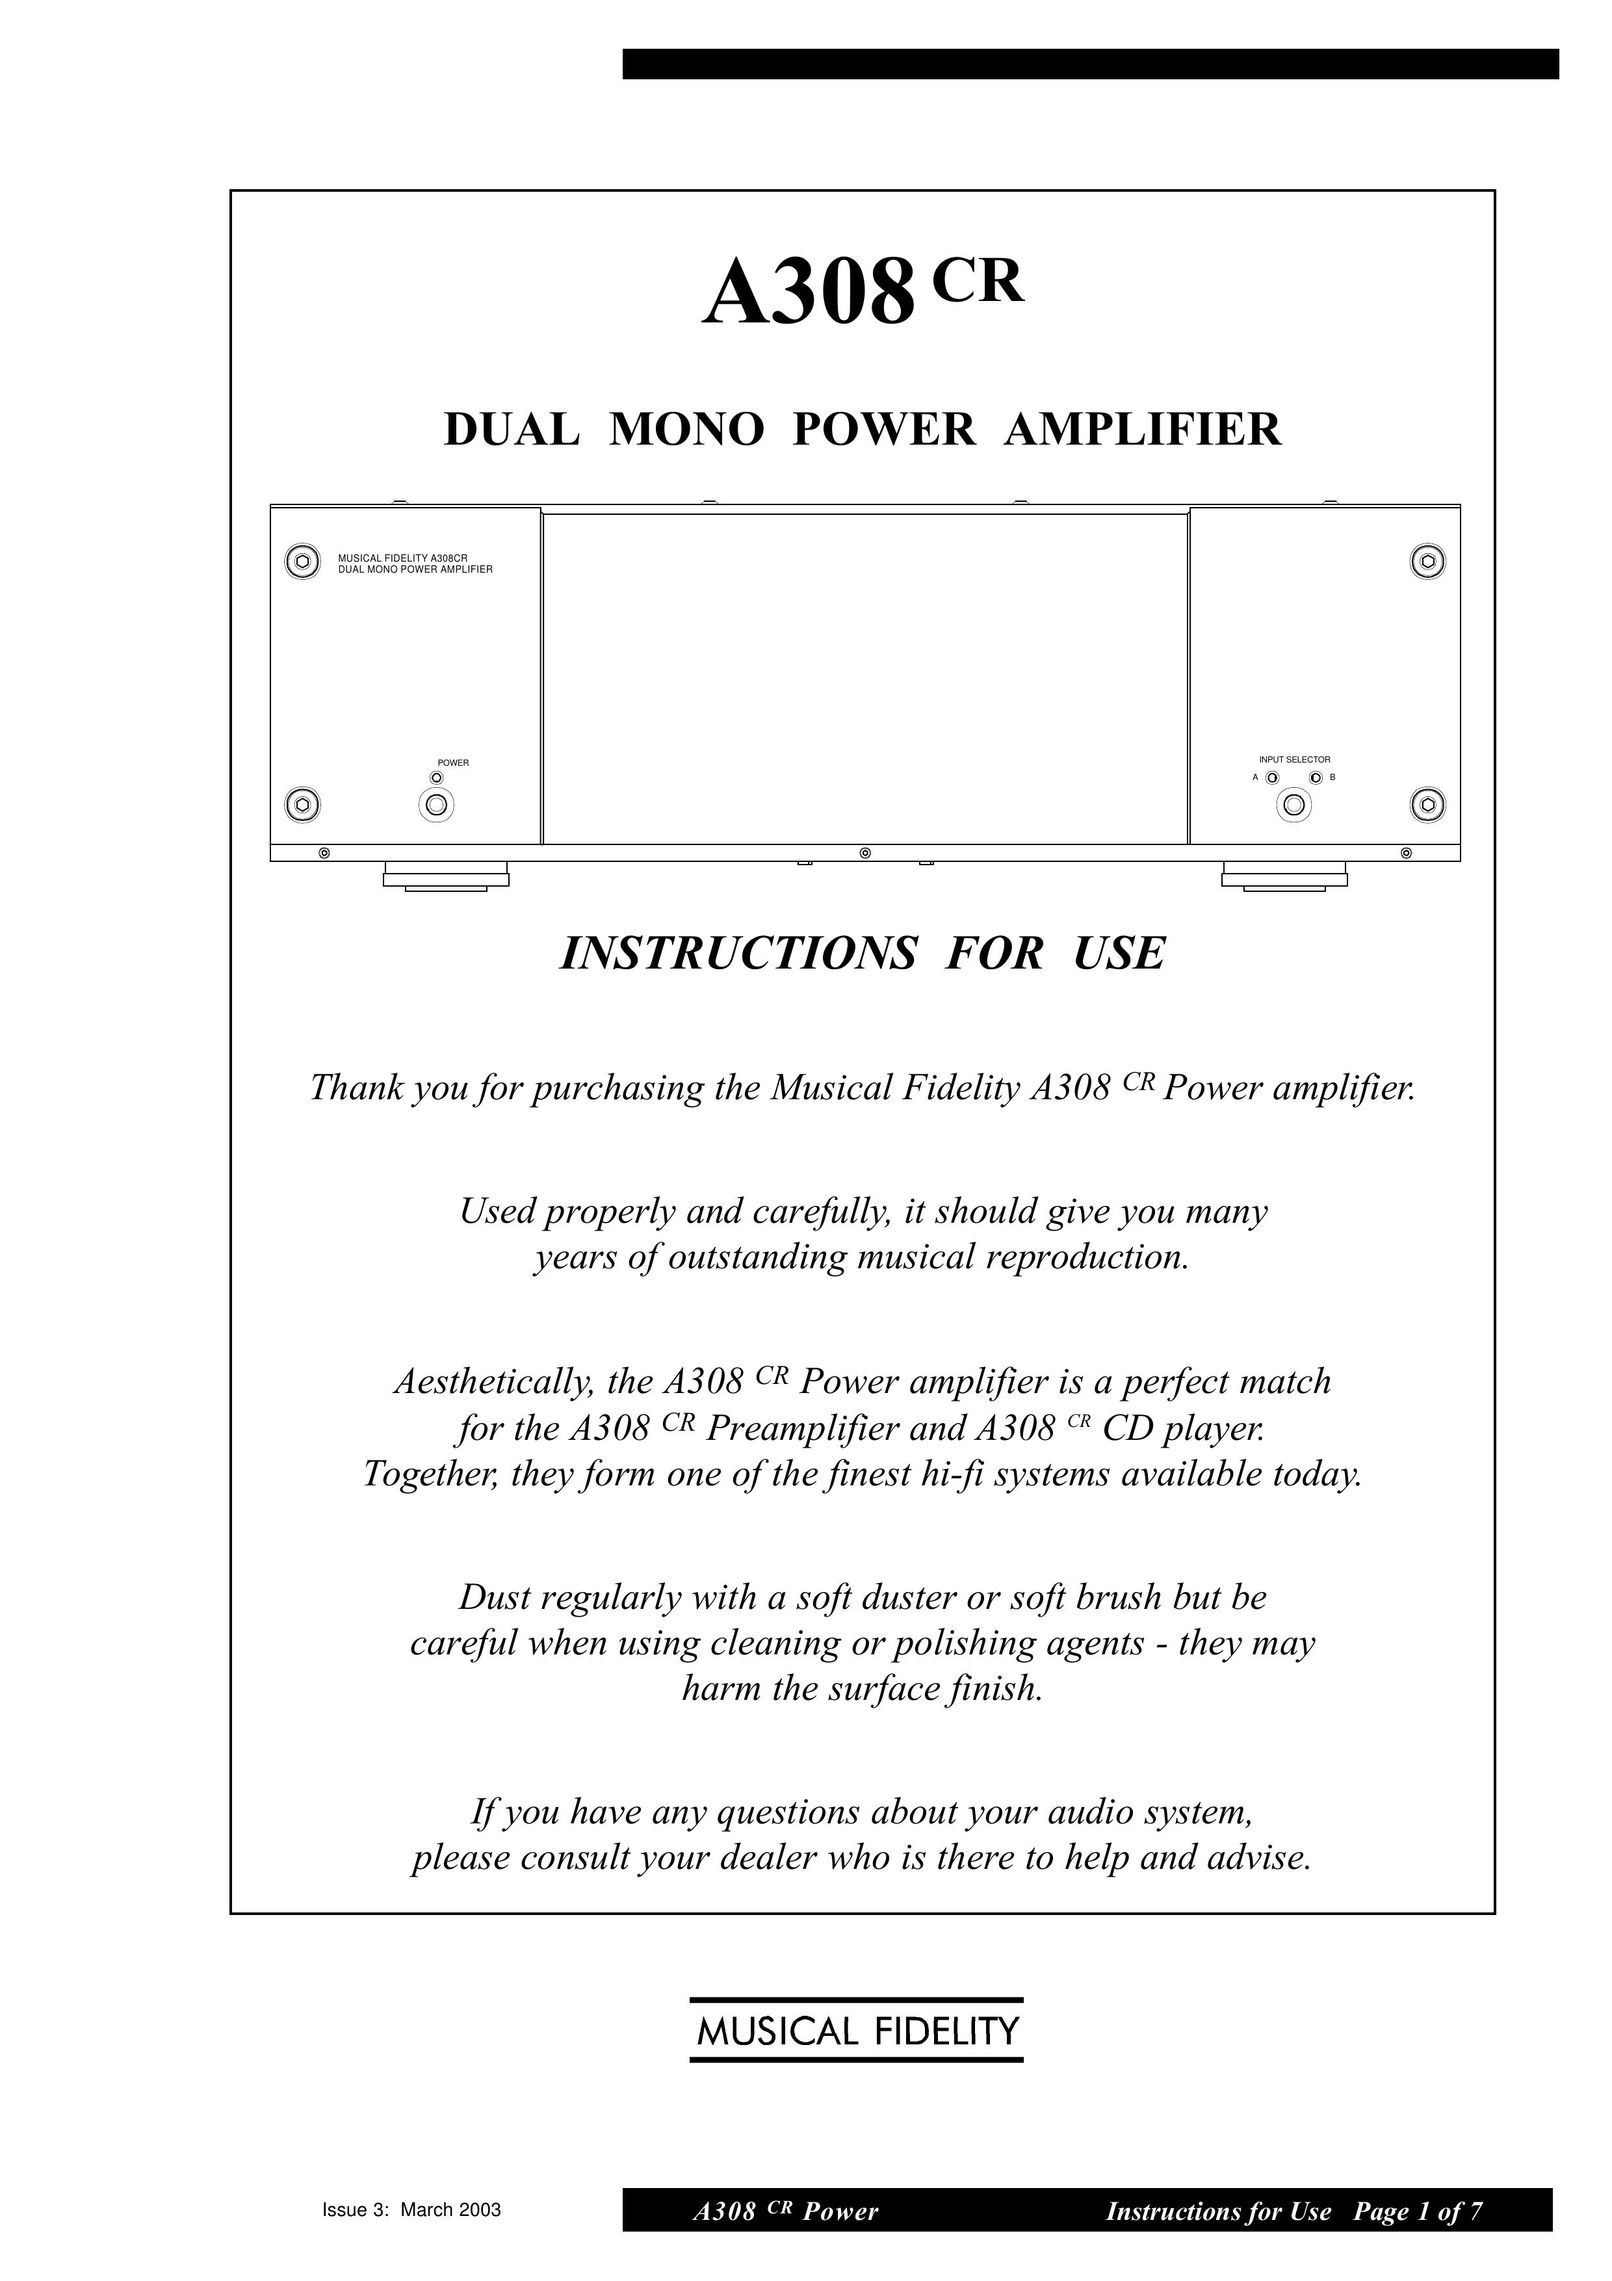 Musical Fidelity A308 Stereo Amplifier User Manual